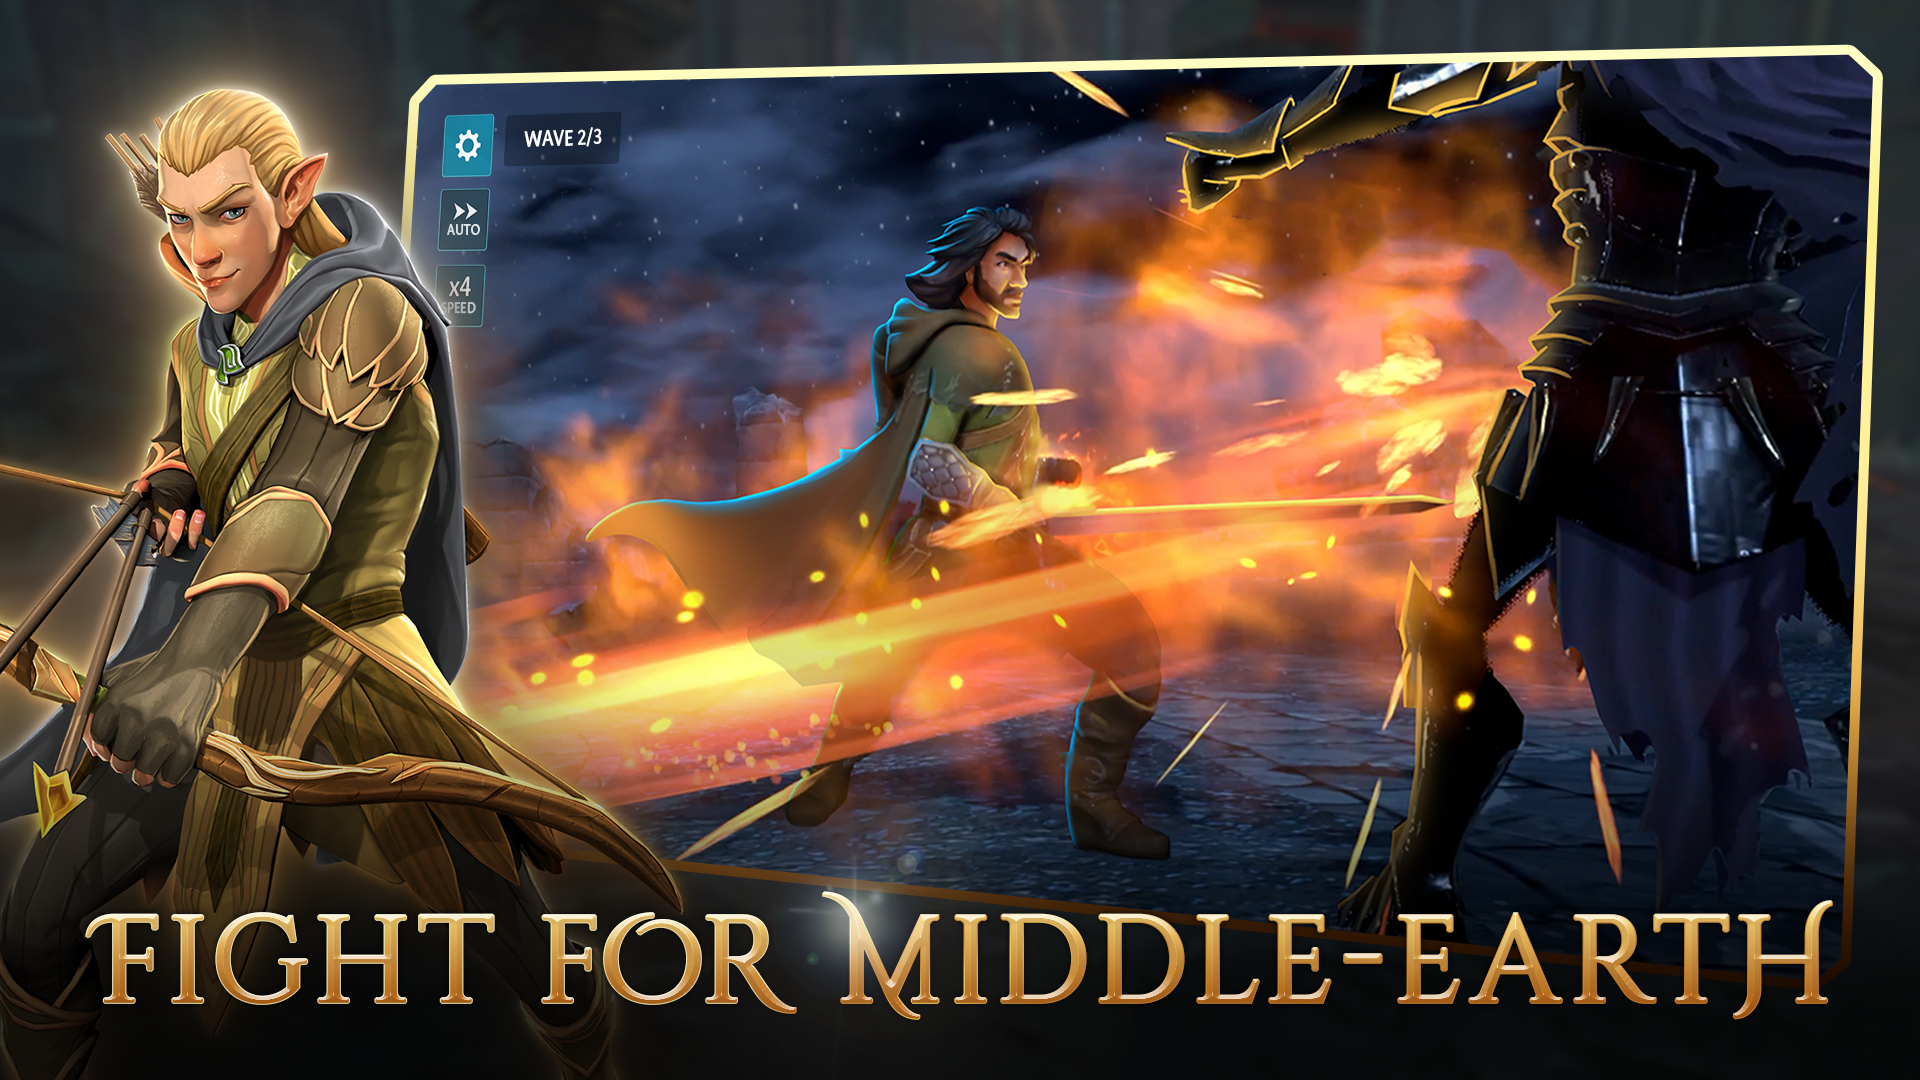 LotR: Heroes of Middle-earth™